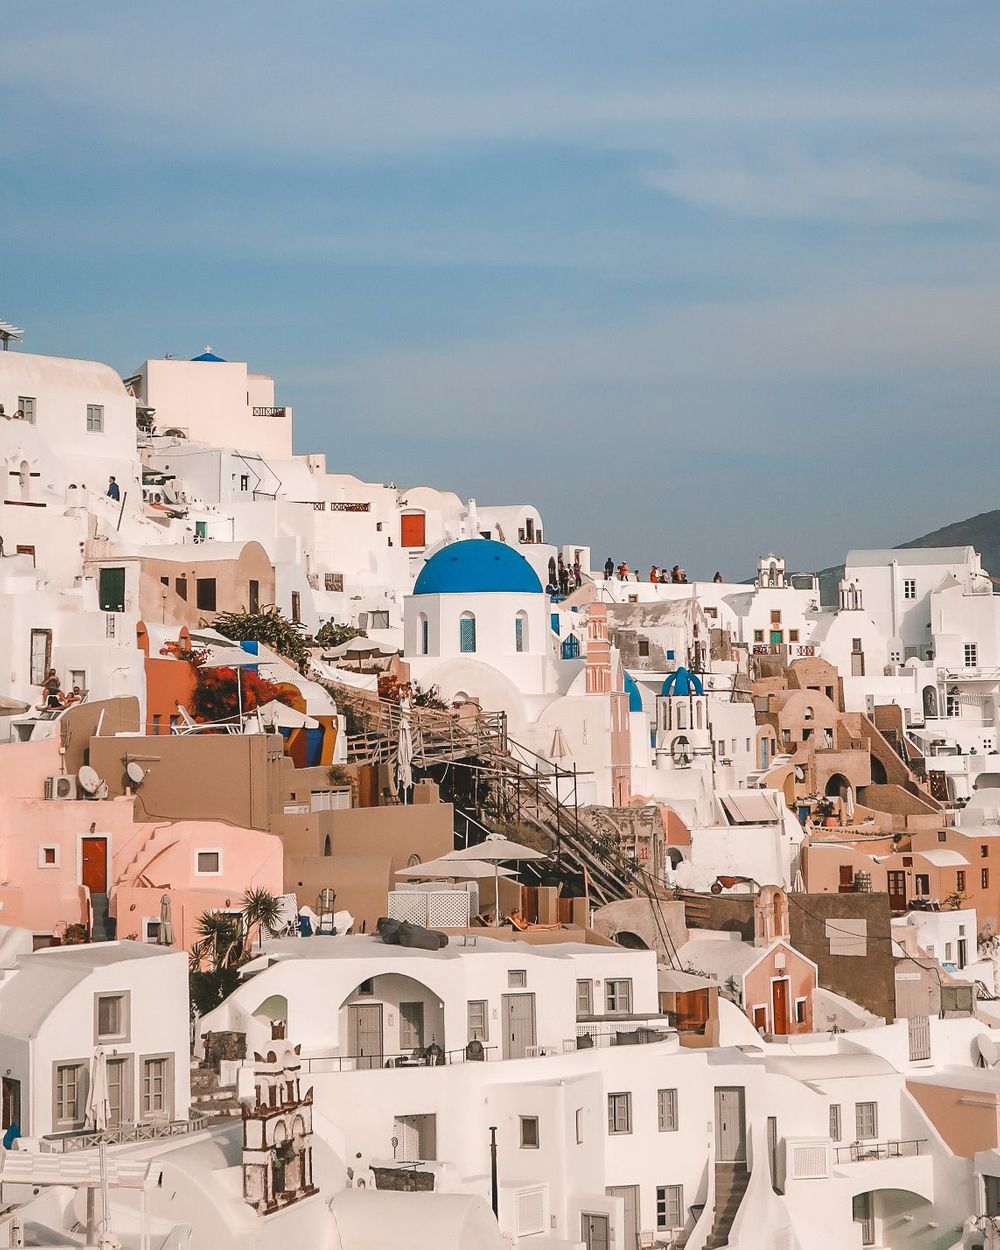 5 Ways to do Santorini on a Budget Without Giving up Luxuries